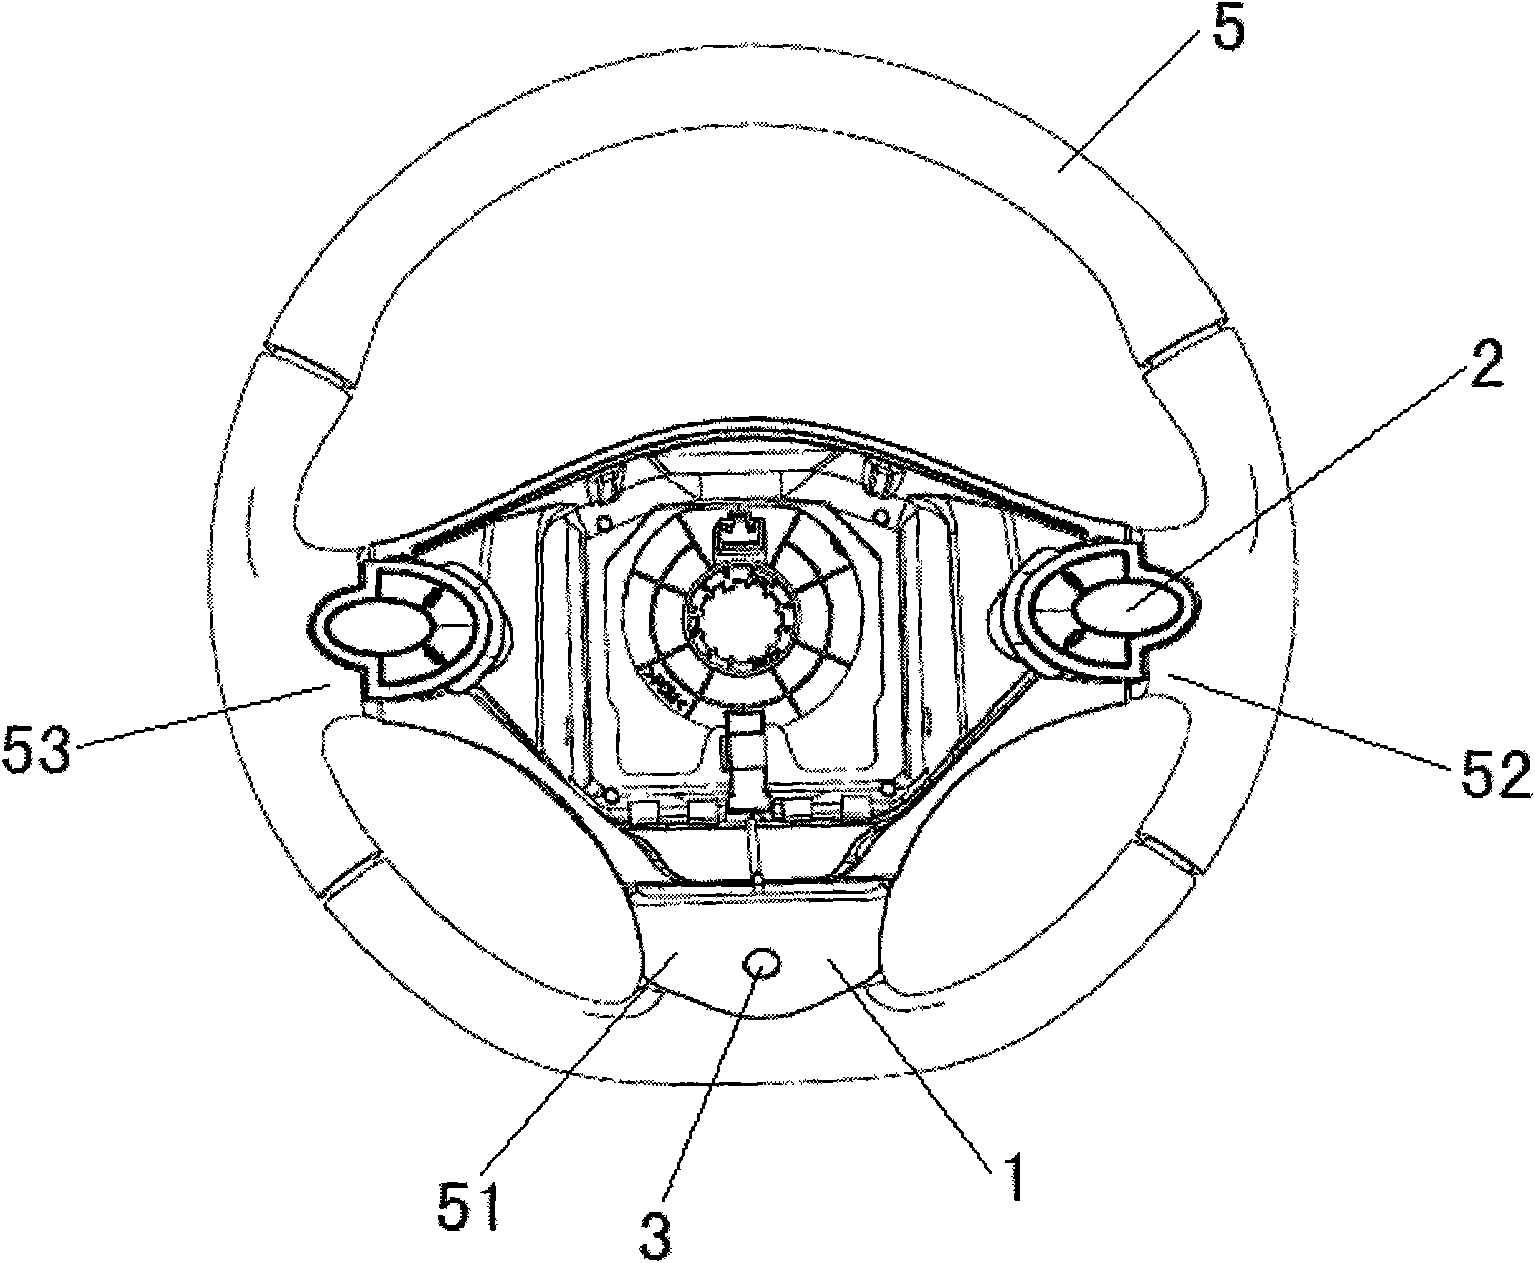 Steering wheel with voice acquisition system